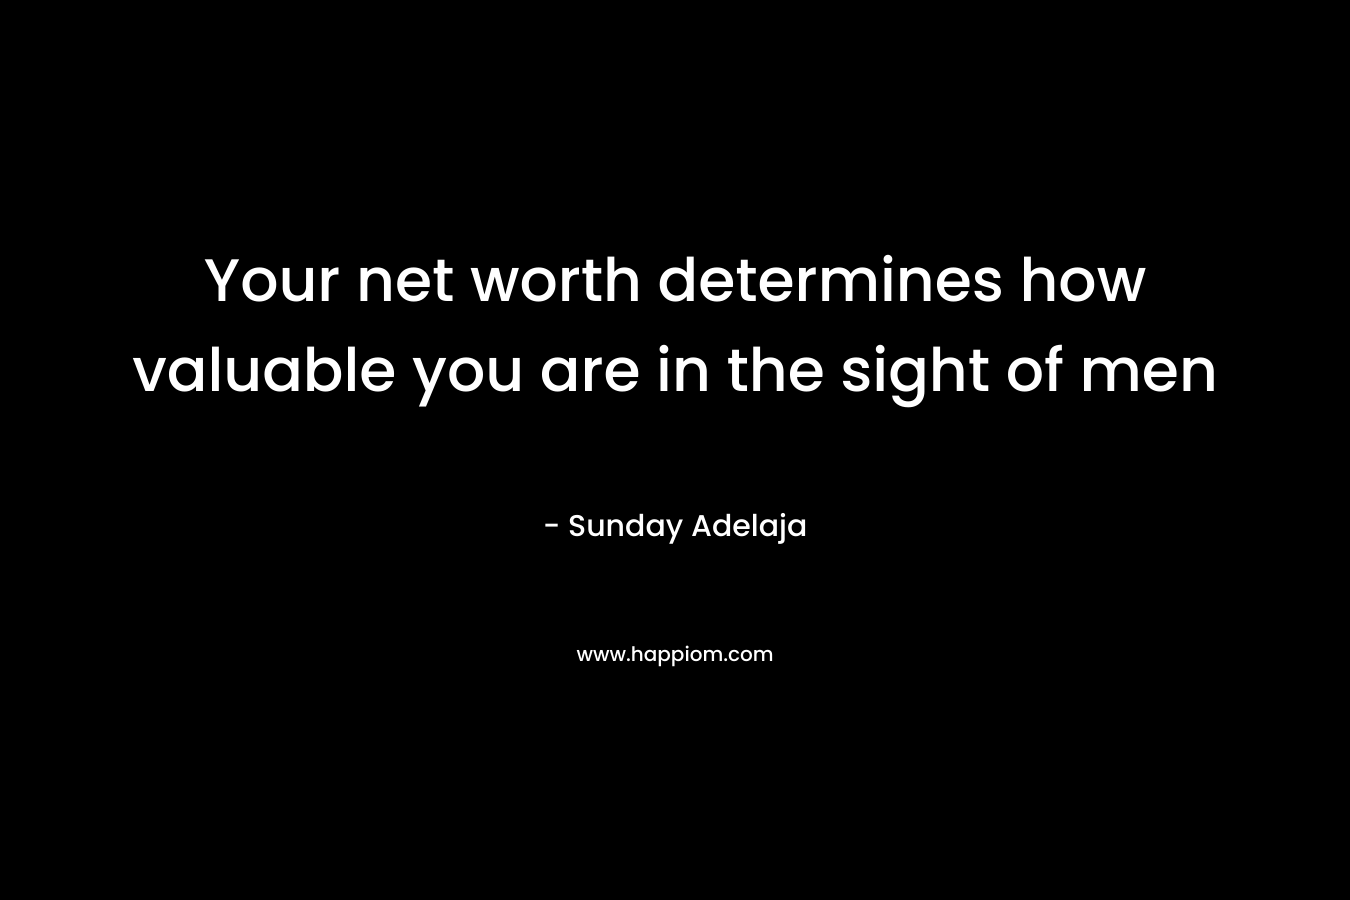 Your net worth determines how valuable you are in the sight of men